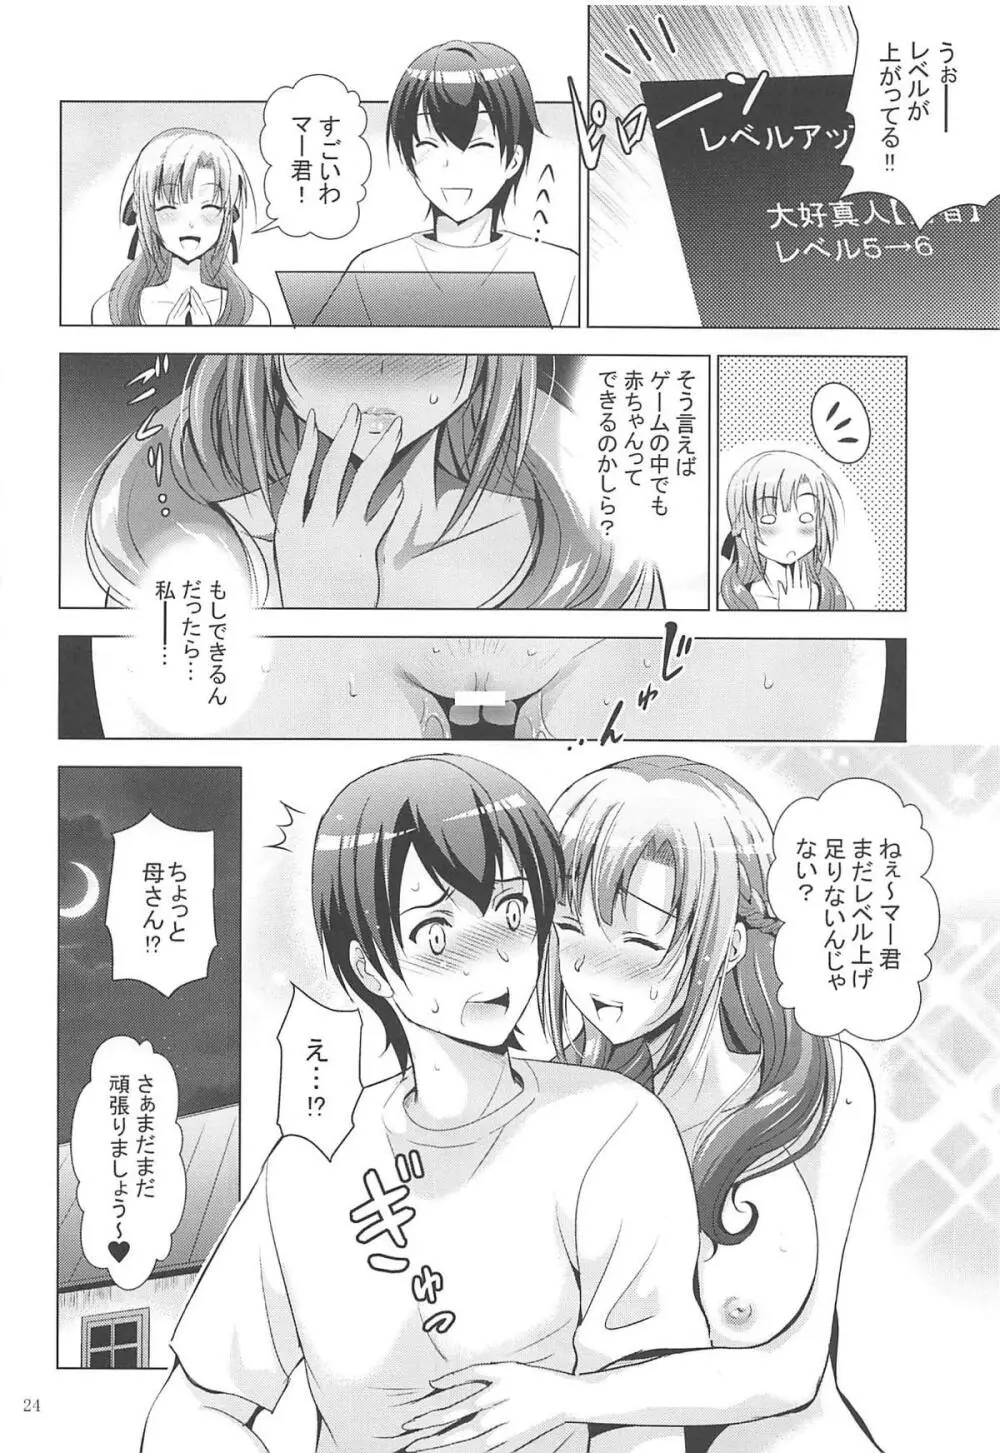 MOUSOU THEATER 61 23ページ